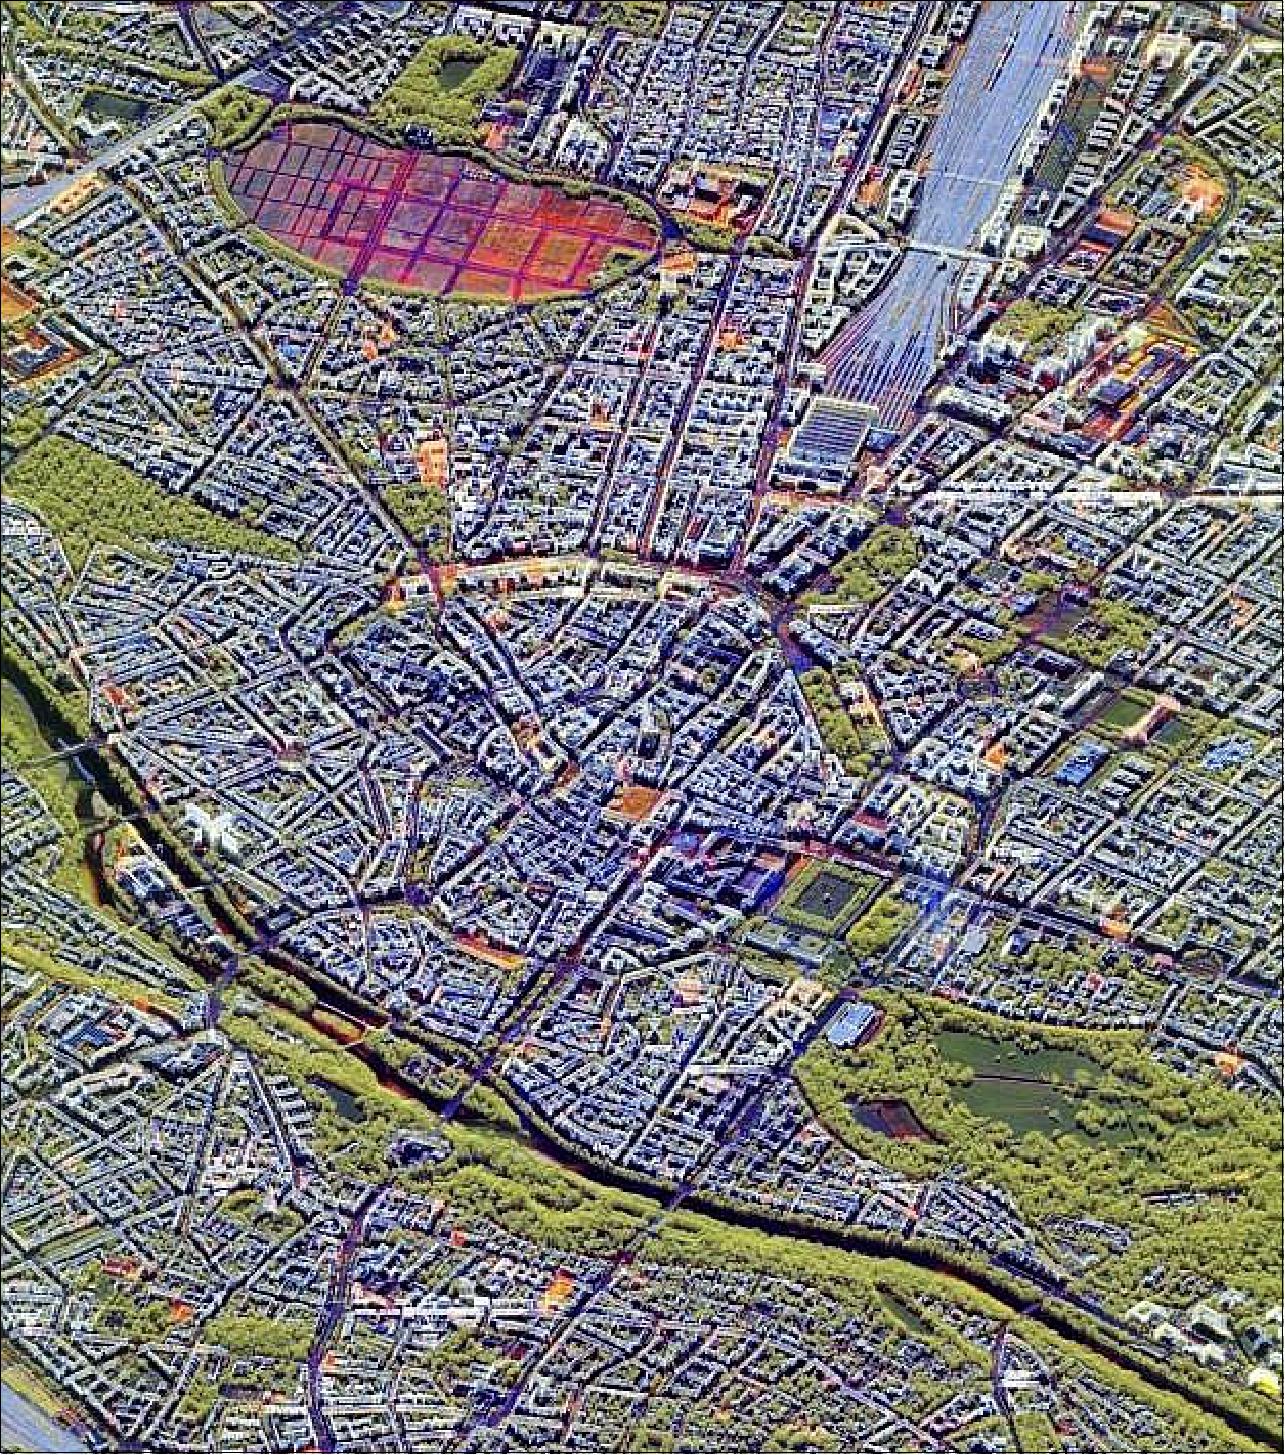 Figure 10: Munich city center observed with TerraSAR-X [image credit: DLR (CC BY-NC-ND 3.0)]